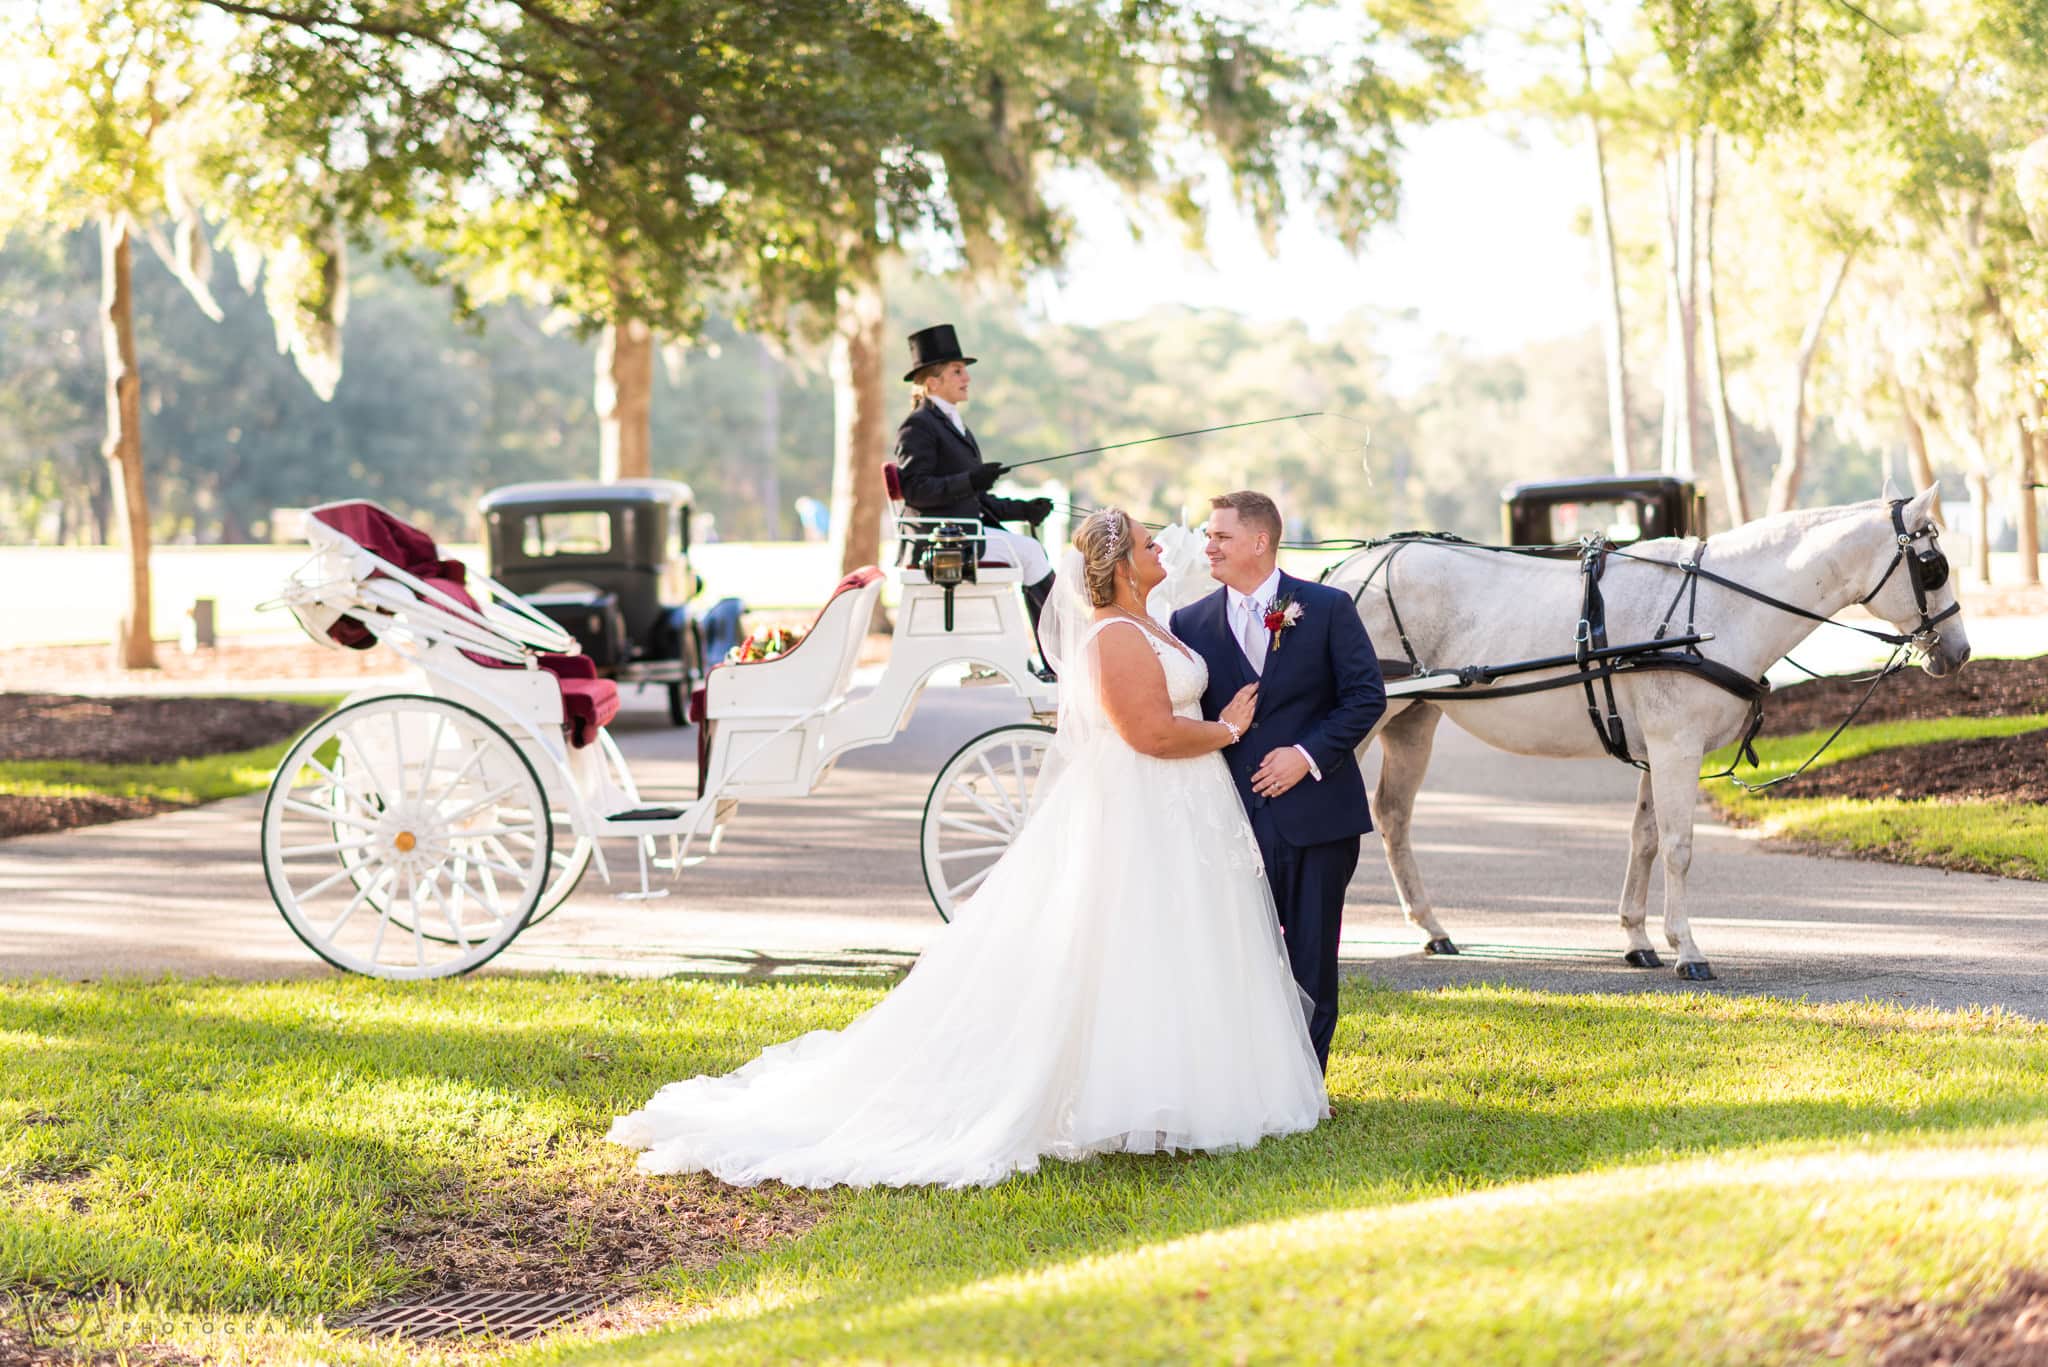 Bride and groom looking at each other in front of carriage